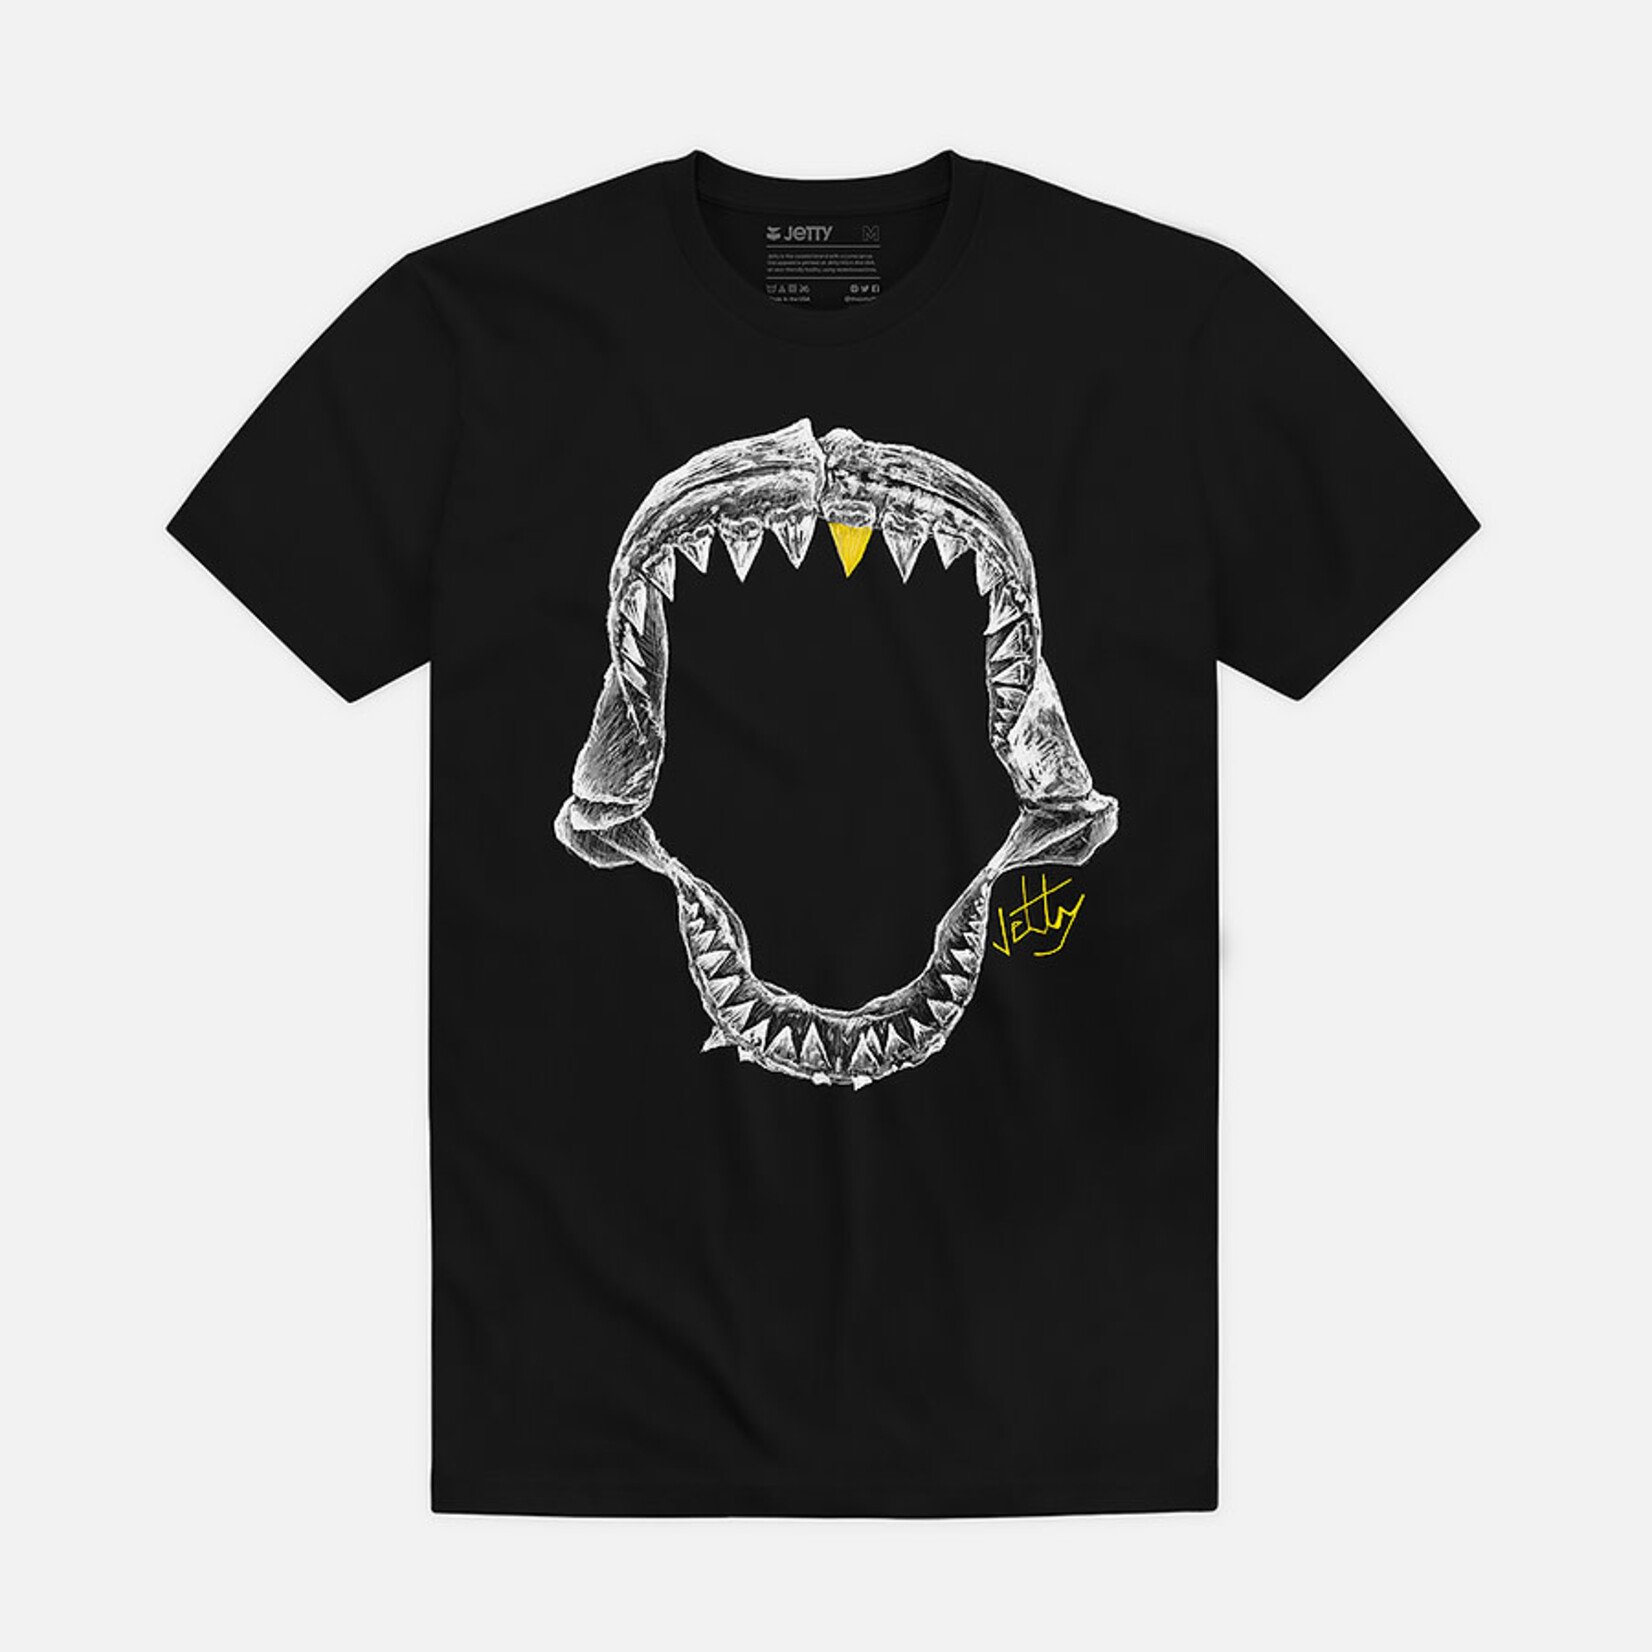 Jetty Youth Jaws Tee